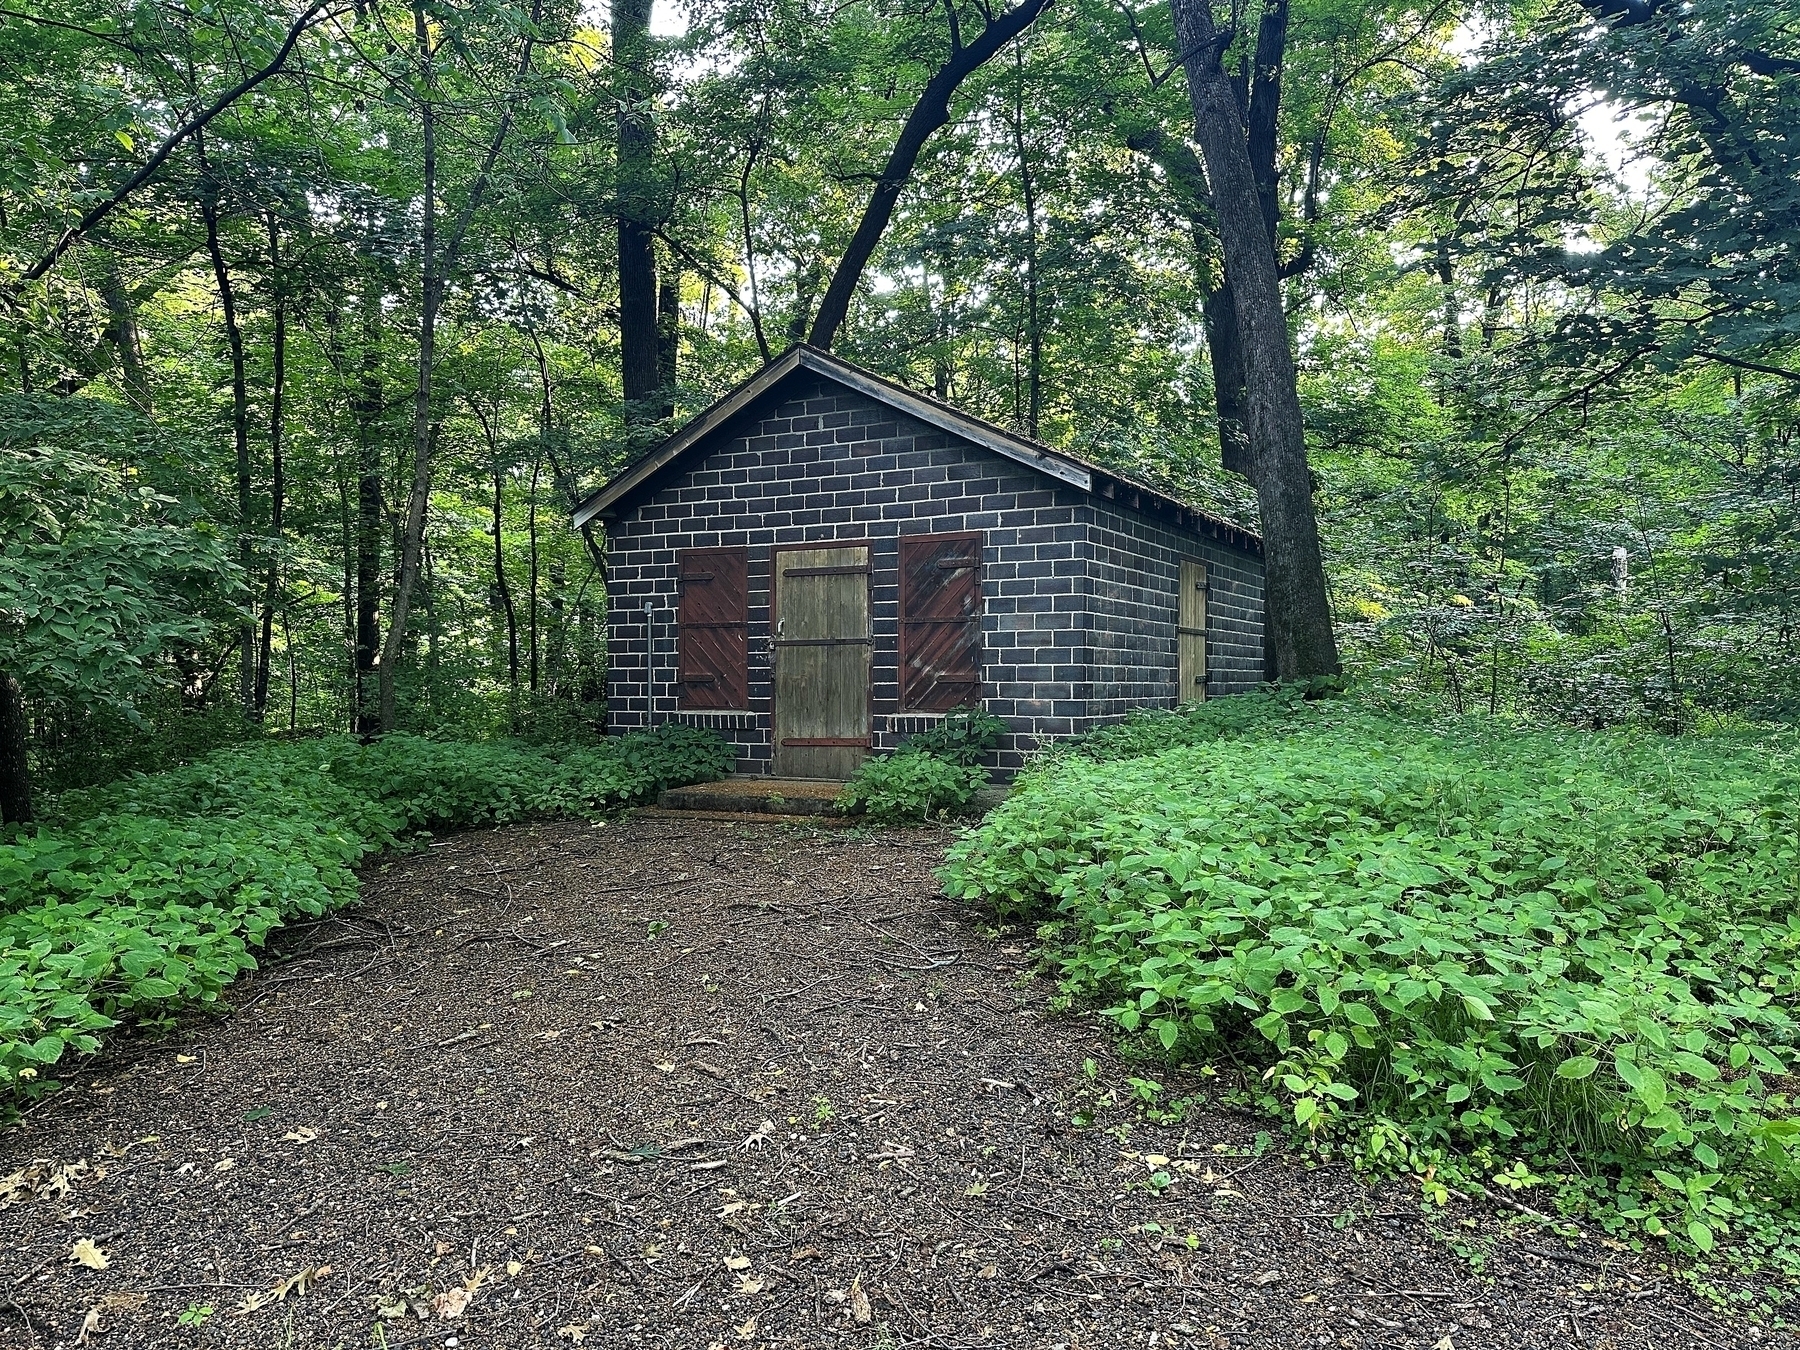 A small stone cabin with wooden doors stands amidst a dense forest surrounded by lush green foliage and a dirt path leading to it.